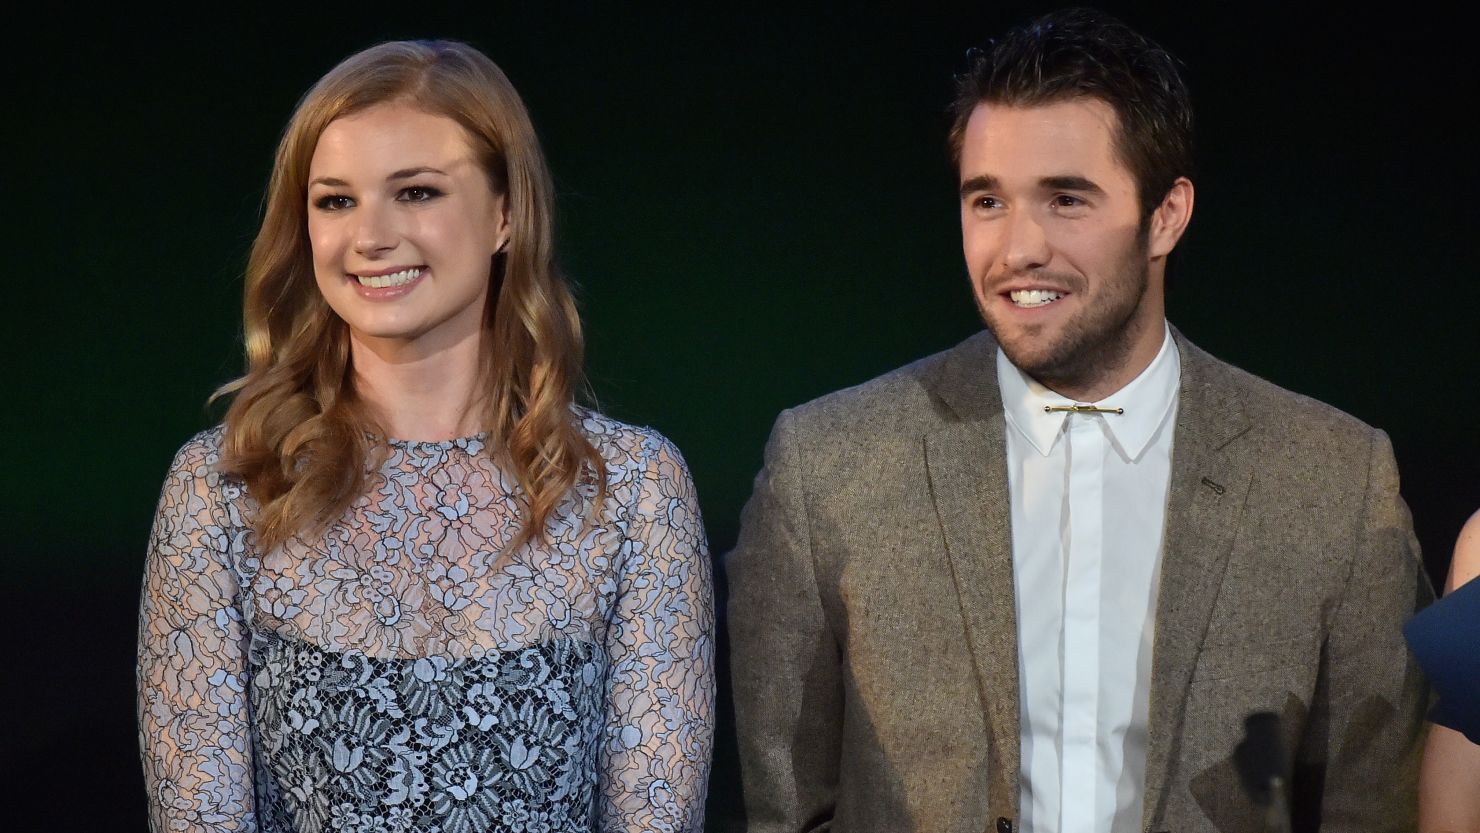 Actors Emily VanCamp (L) and Joshua Bowman speak at the 24th Annual Environmental Media Awards presented by Toyota and Lexus at Warner Bros. Studio on October 18, 2014 in Burbank, California.  